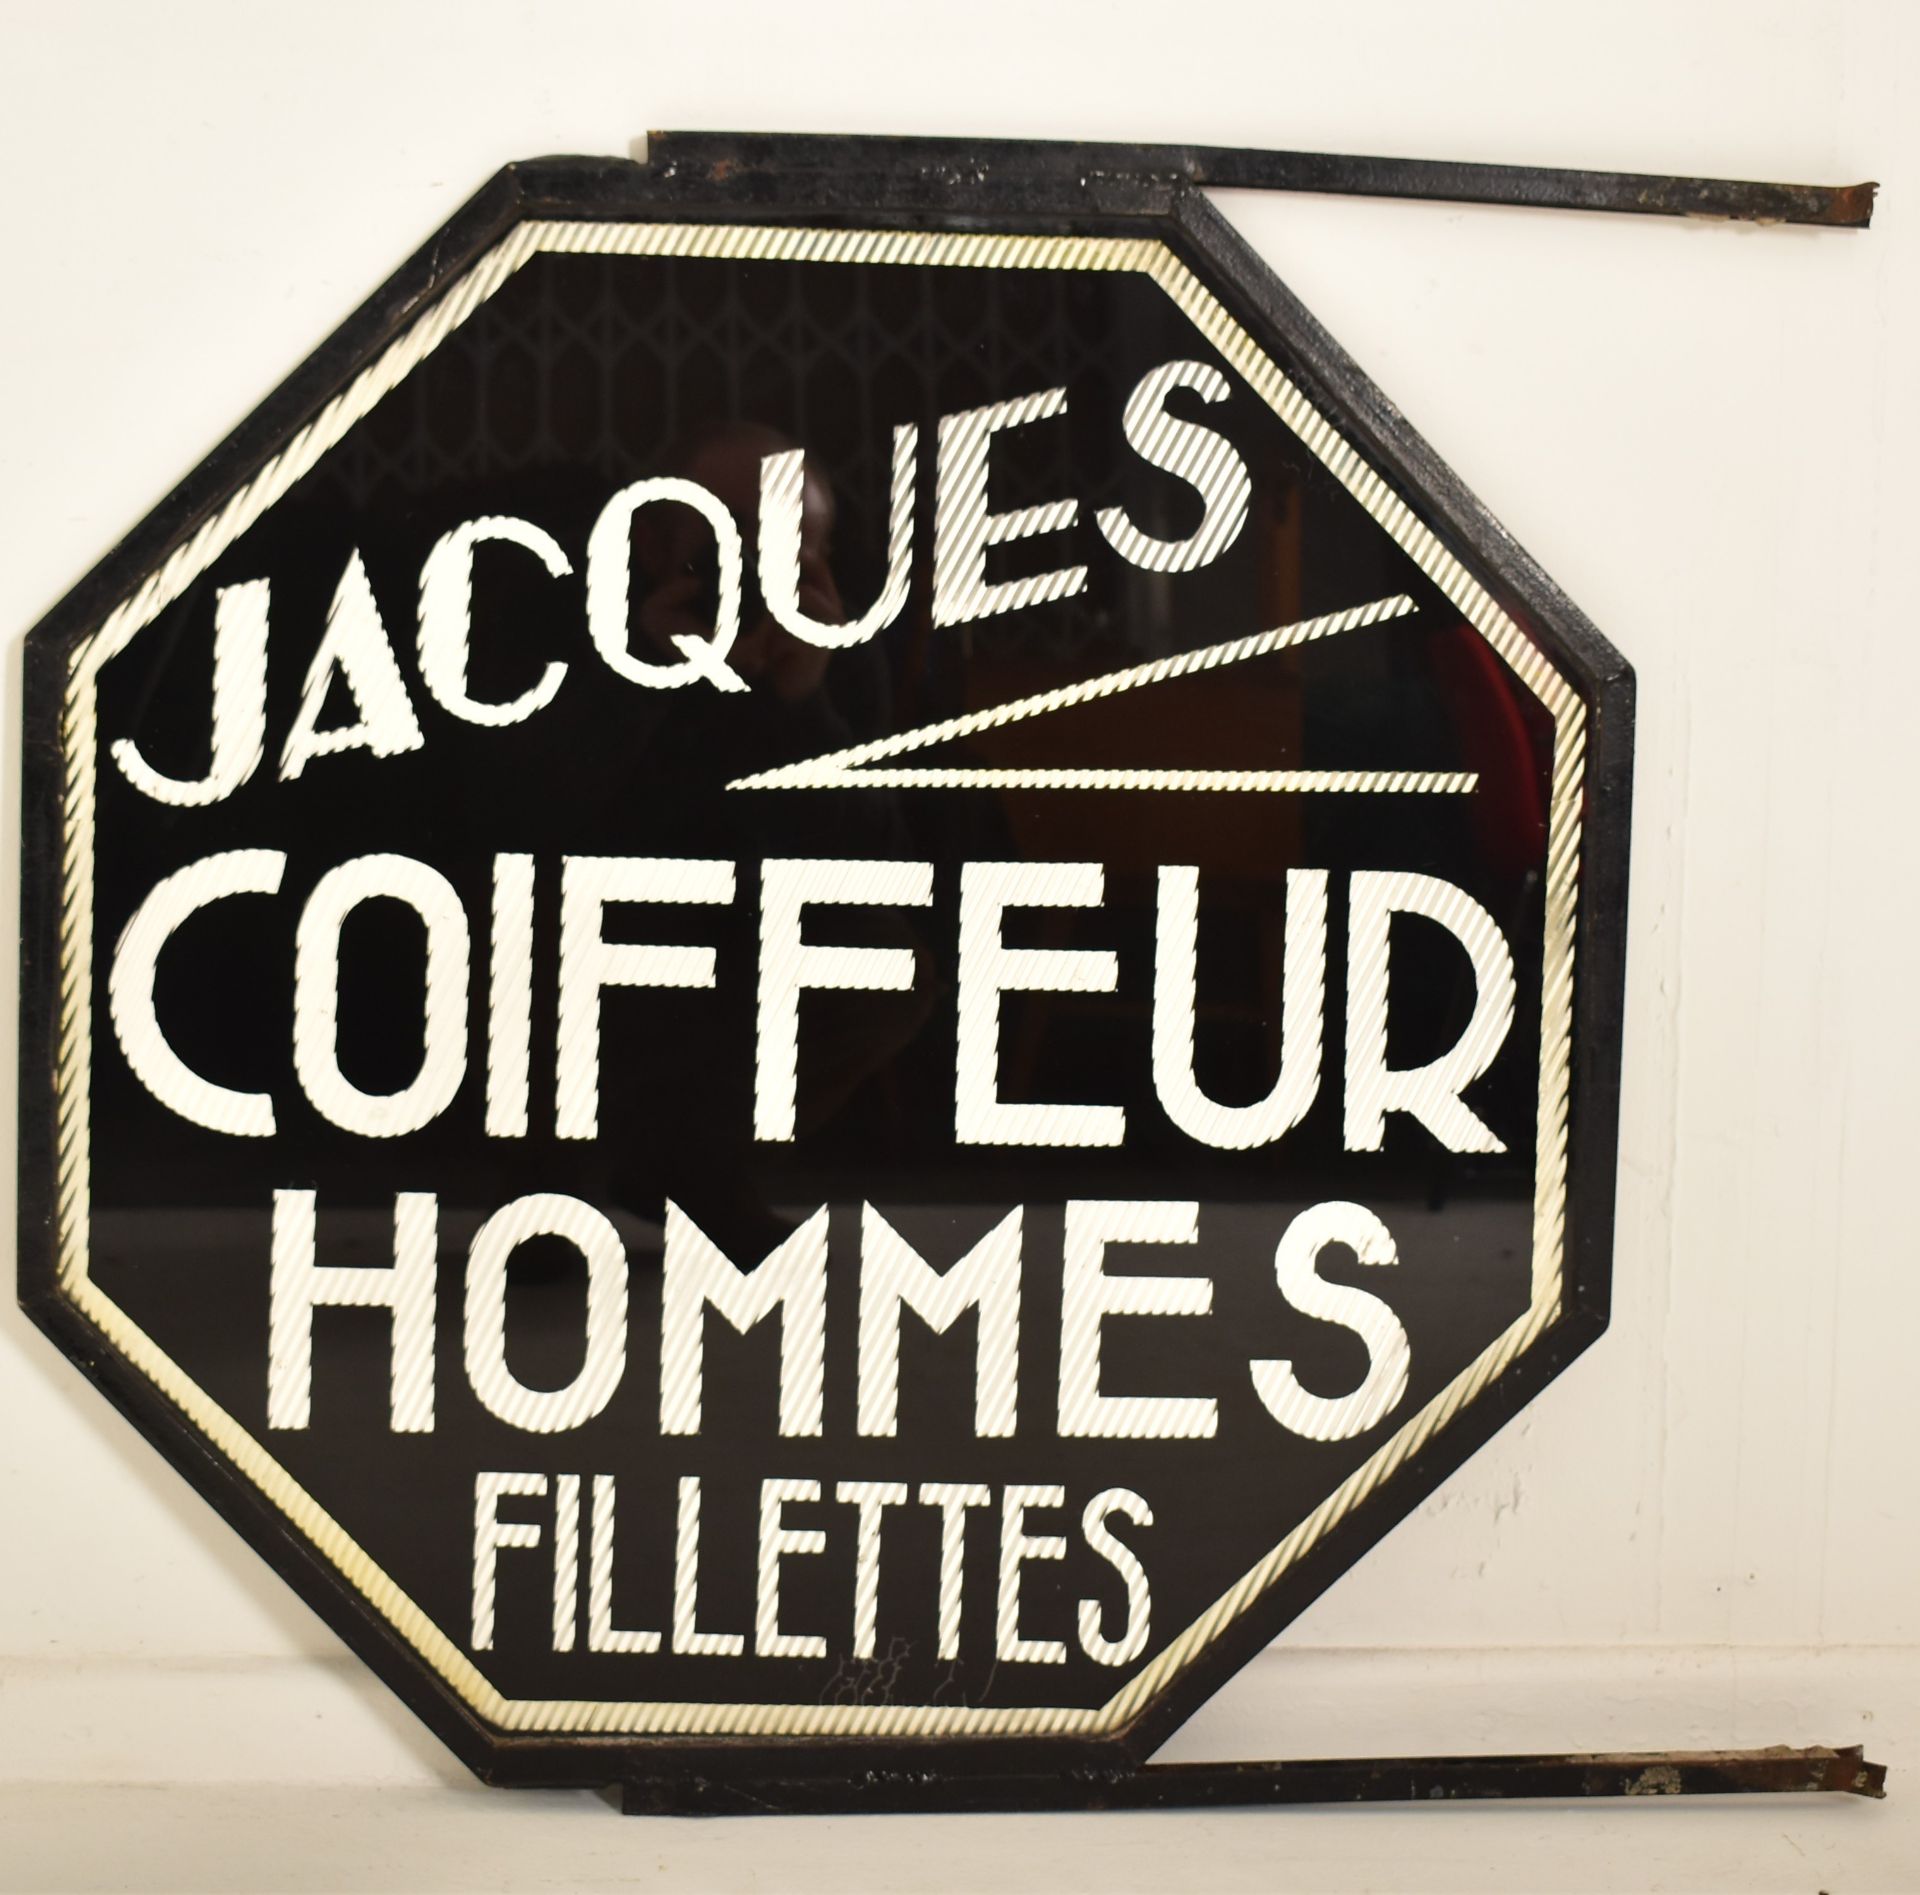 JACQUES COIFFEUR HOMMES FILLETTES - FRENCH GLASS SIGN - Image 5 of 5